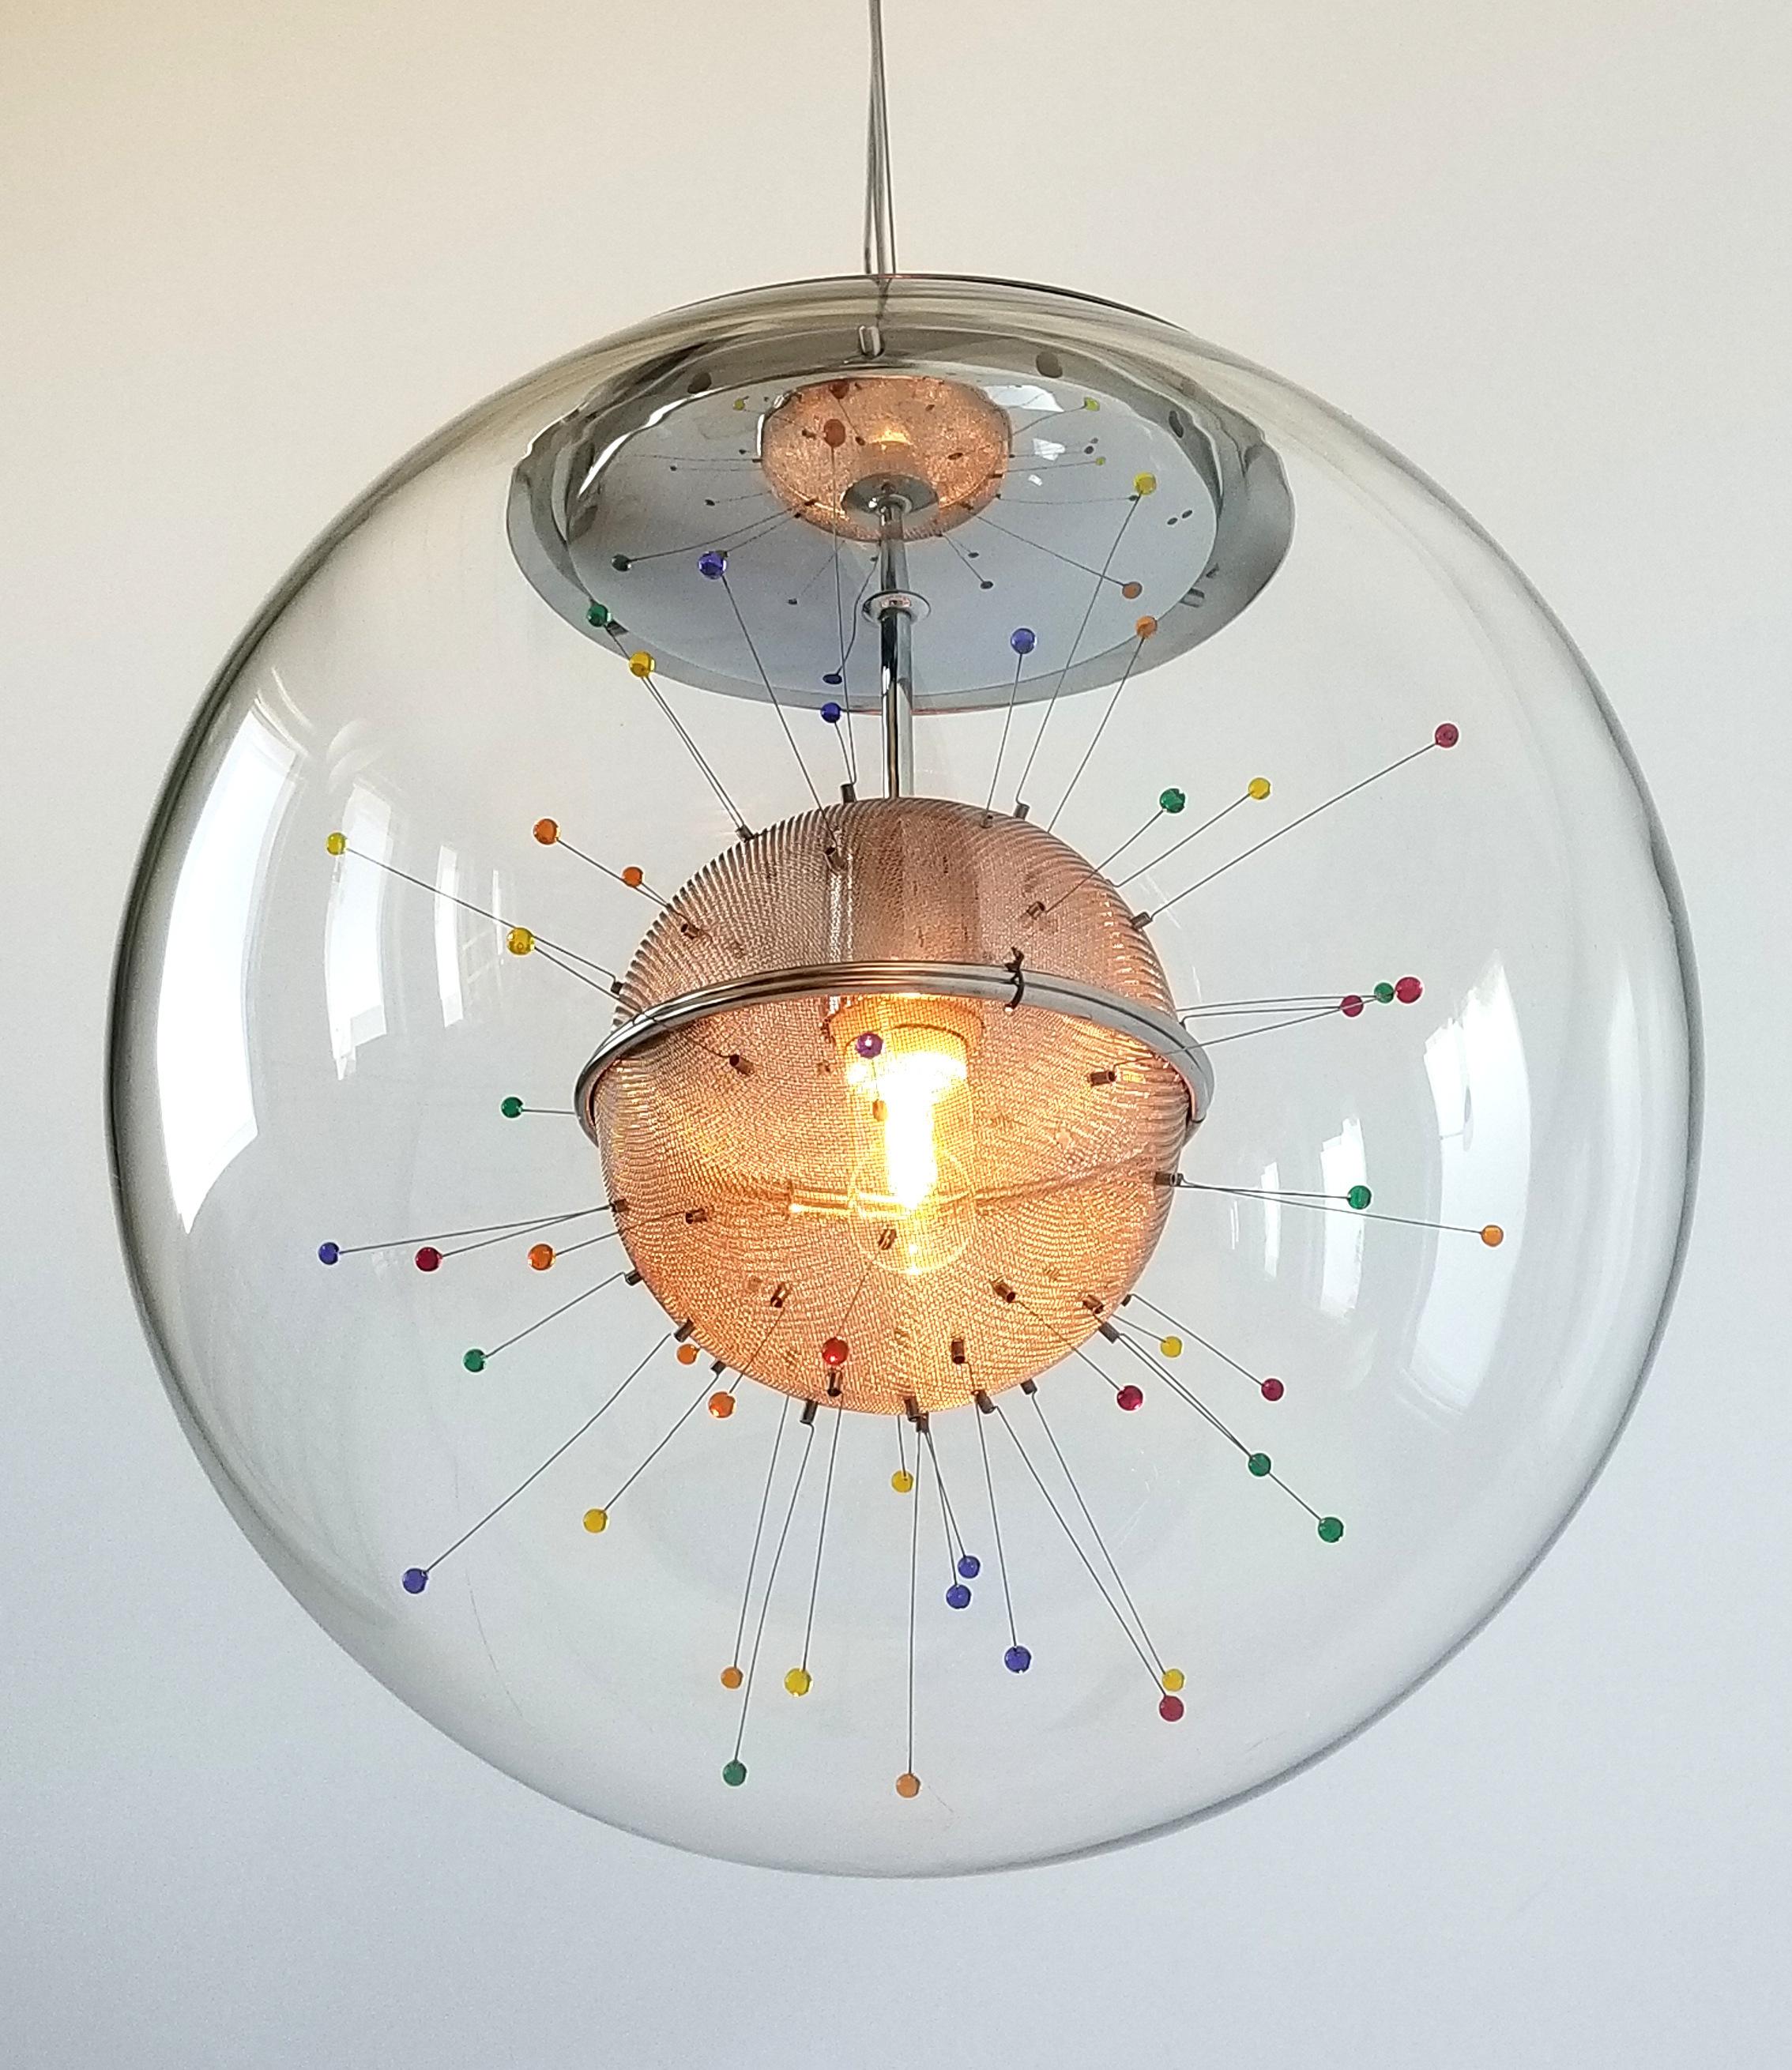 Colorful plastic droplet hanging at the tip of a springned wire enclosed in a thick glass shade. 

Well made solid construction with prime quality hardware. 

Shade measure 15 inches diameter. 

Height adjustable with an efficient sliding